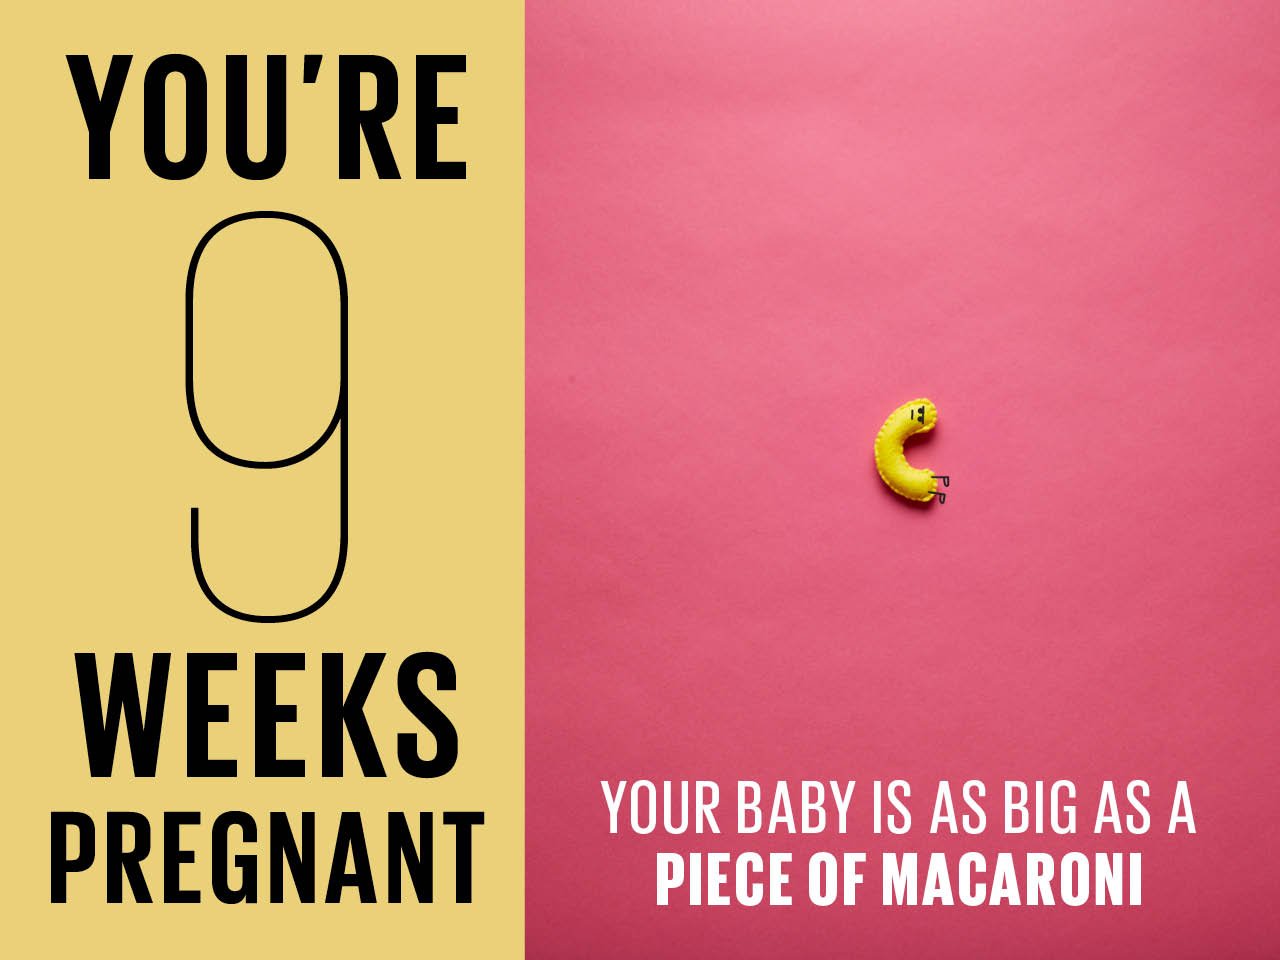 Felt piece of macaroni used to show how big baby is at 9 weeks